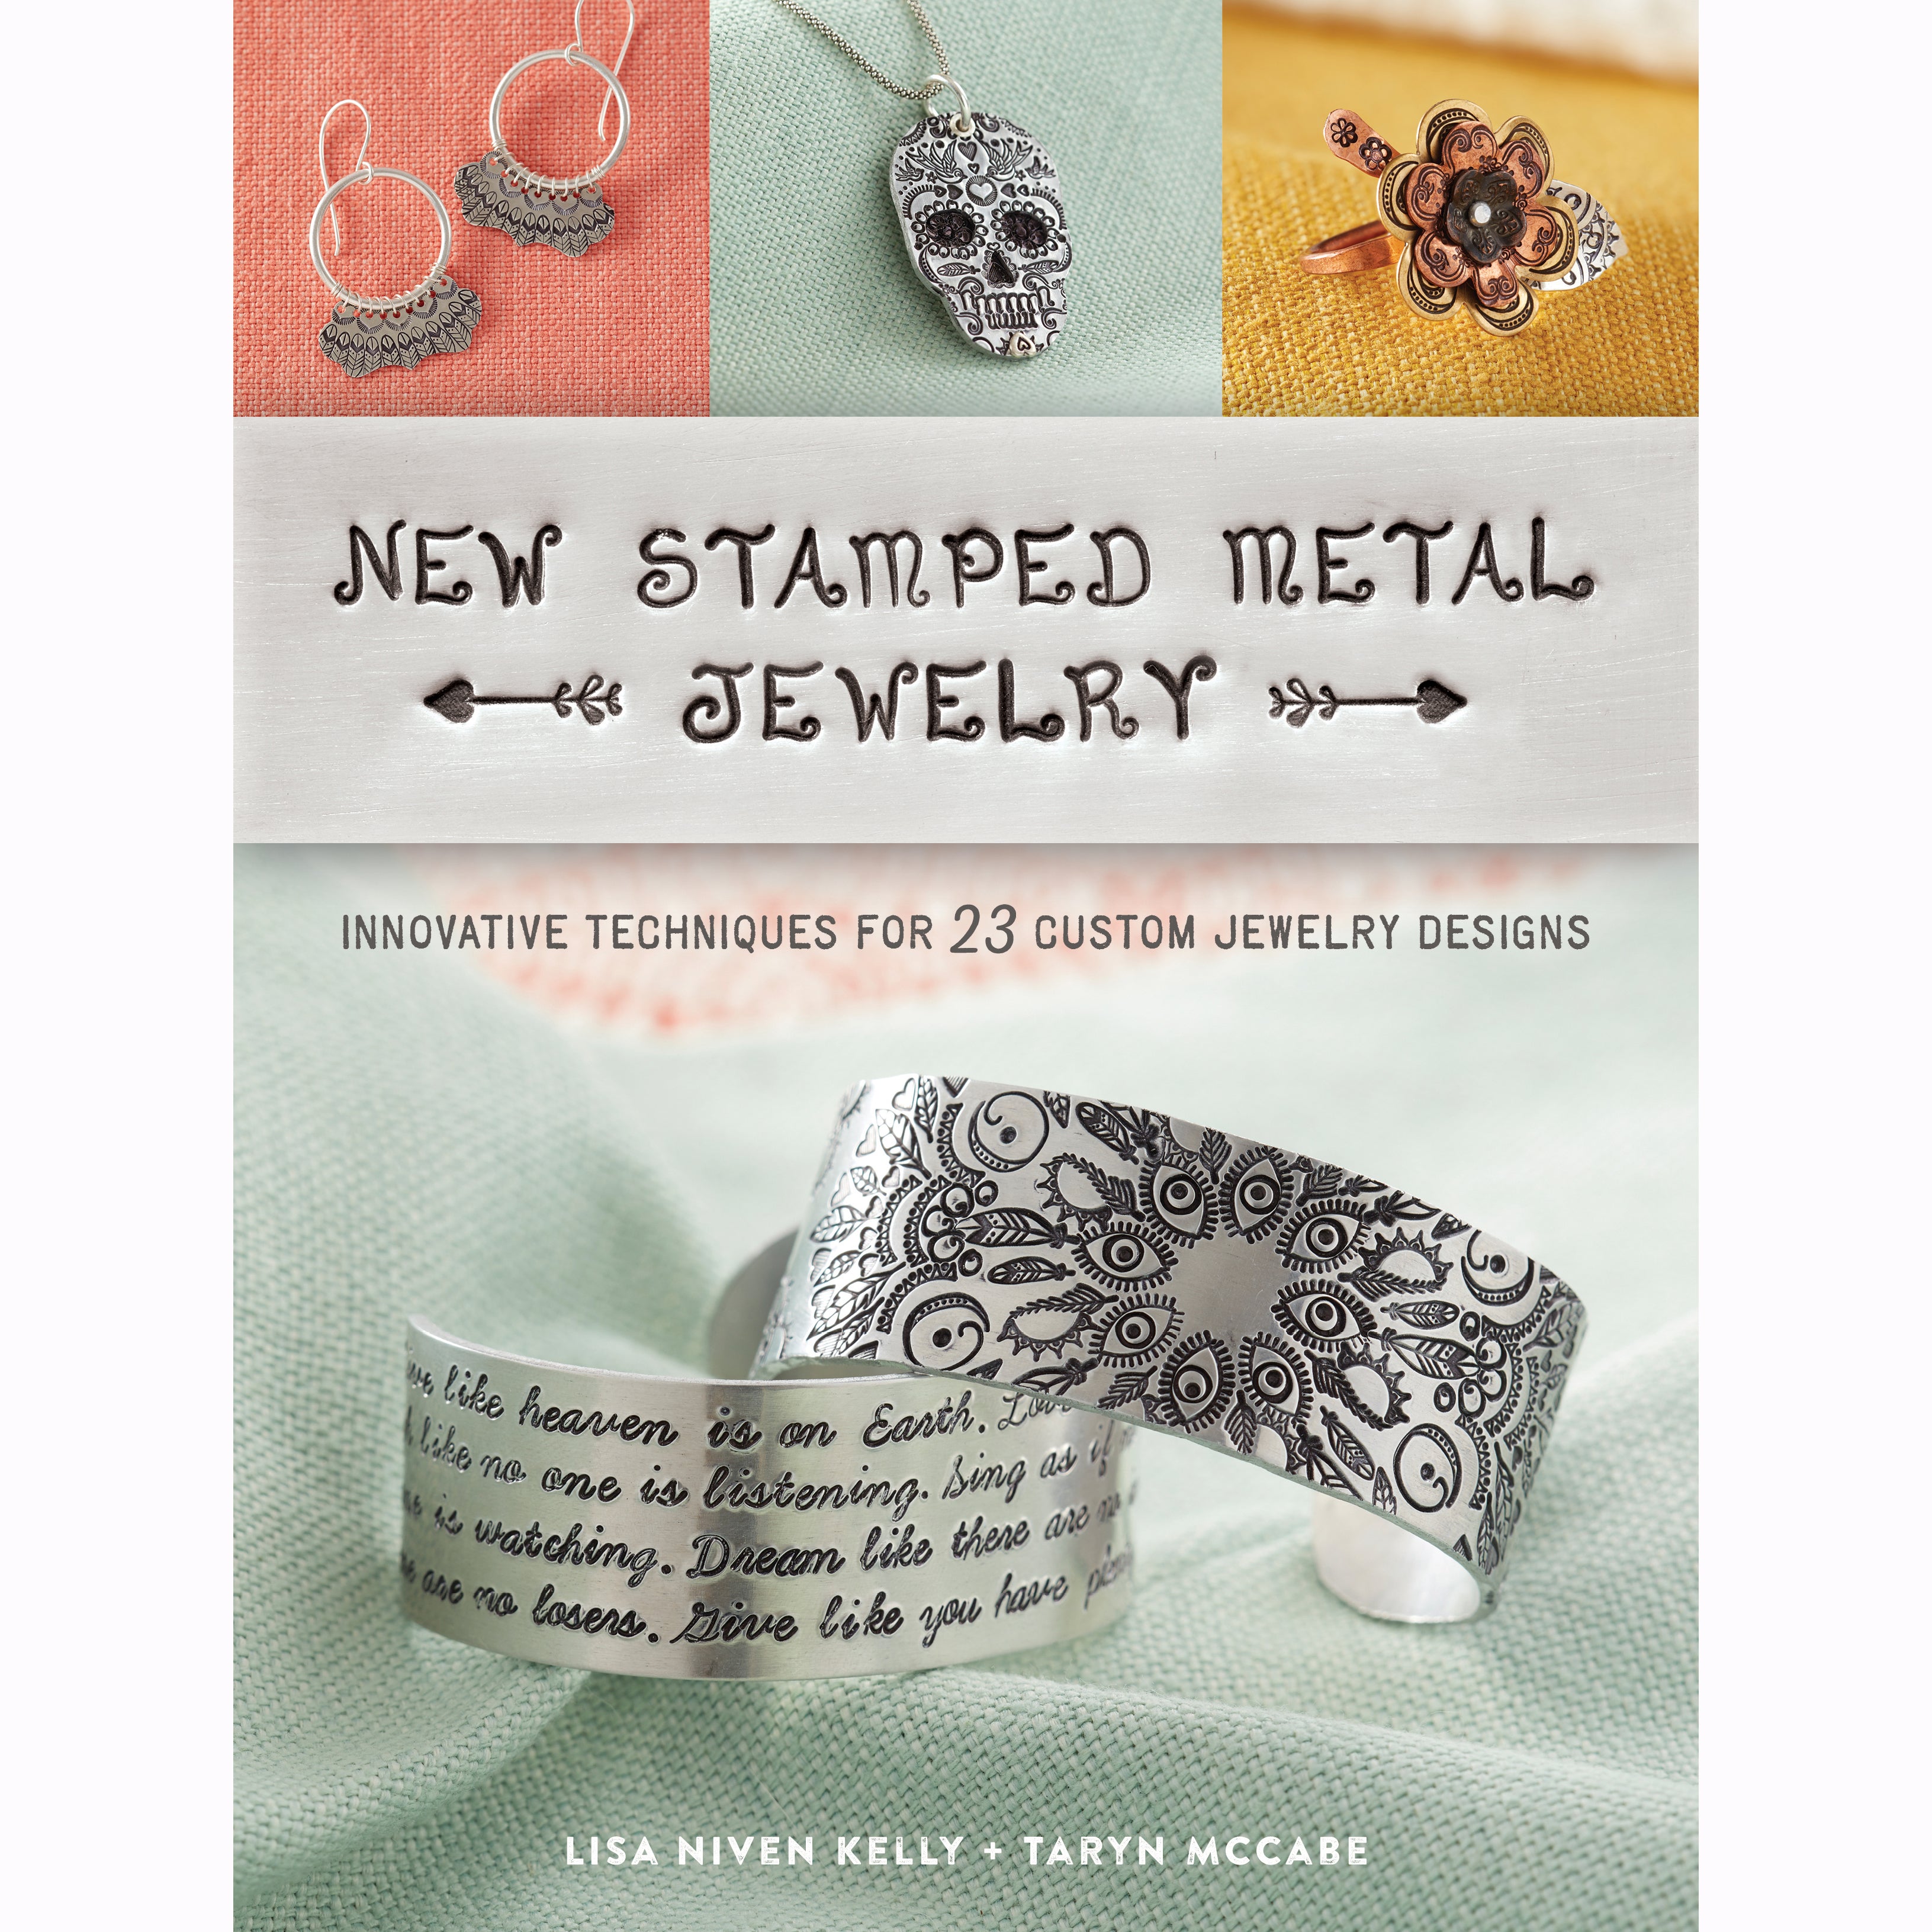 Tools to Make Copper Wire Jewelry for Beginners: The ideal and simple guide  to begin your own copper wire jewelries (tools) (Paperback)